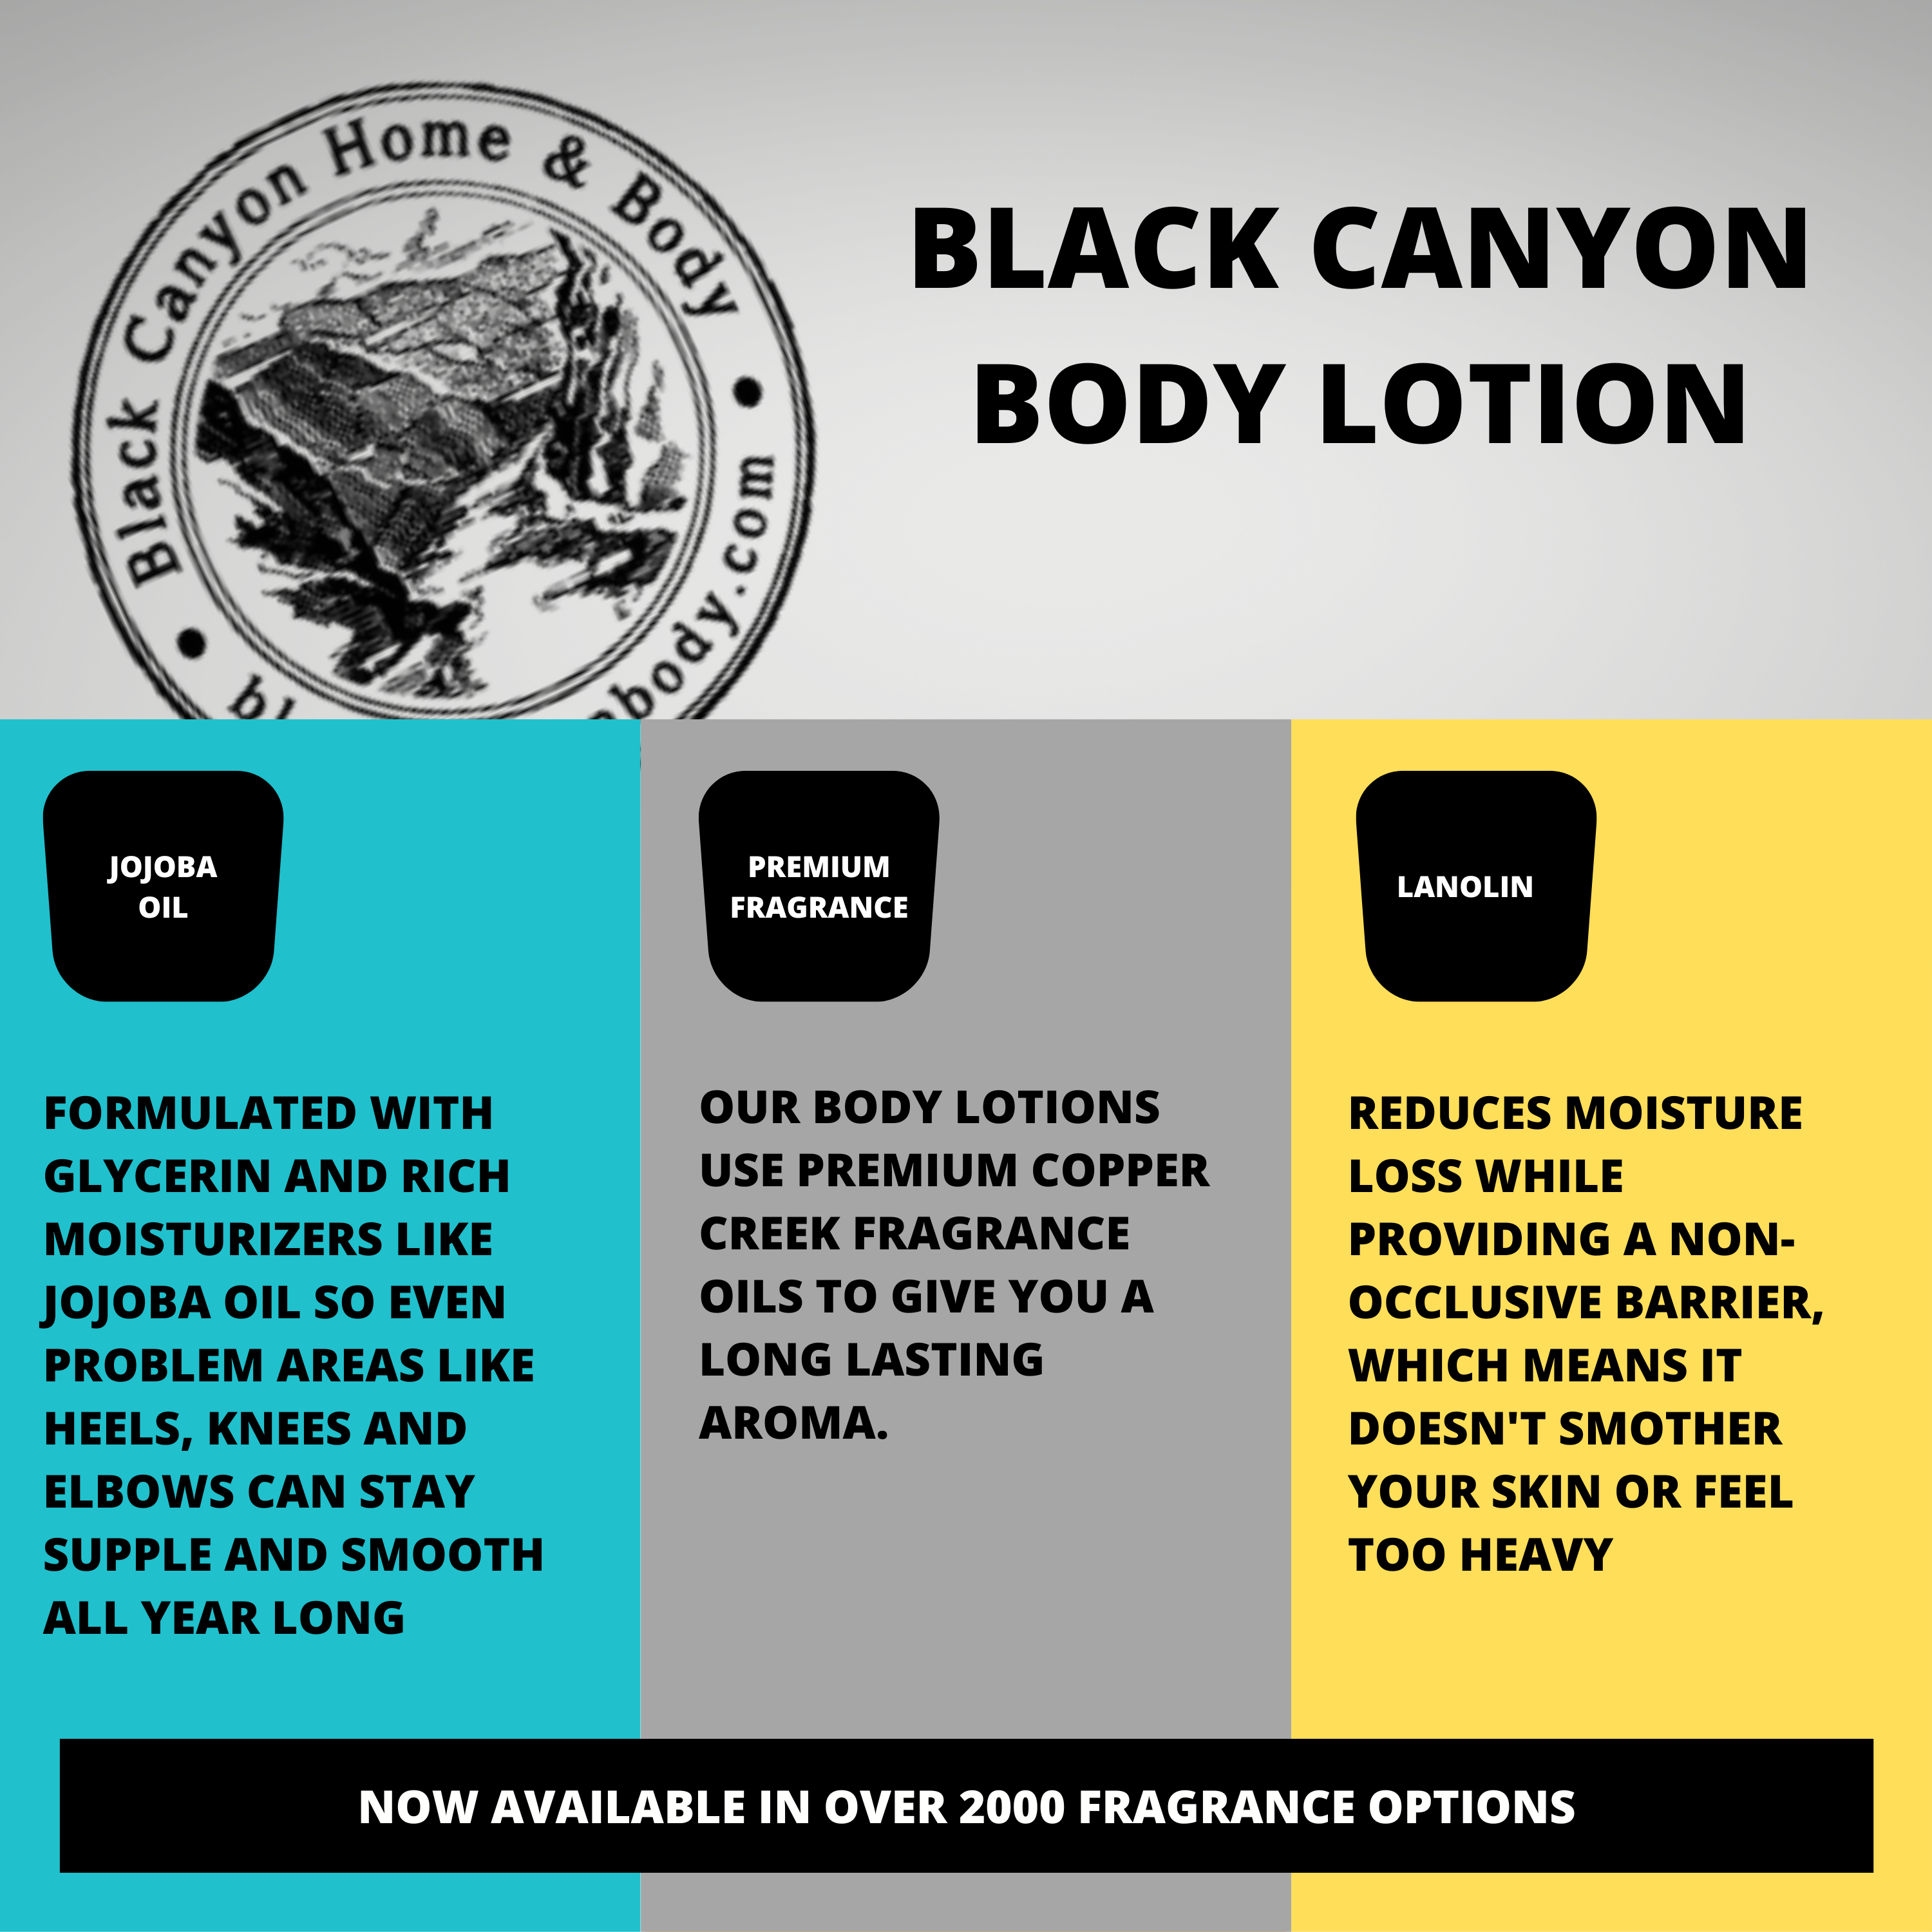 Black Canyon Simply Sexy Scented Luxury Body Lotion with Lanolin and Jojoba Oil